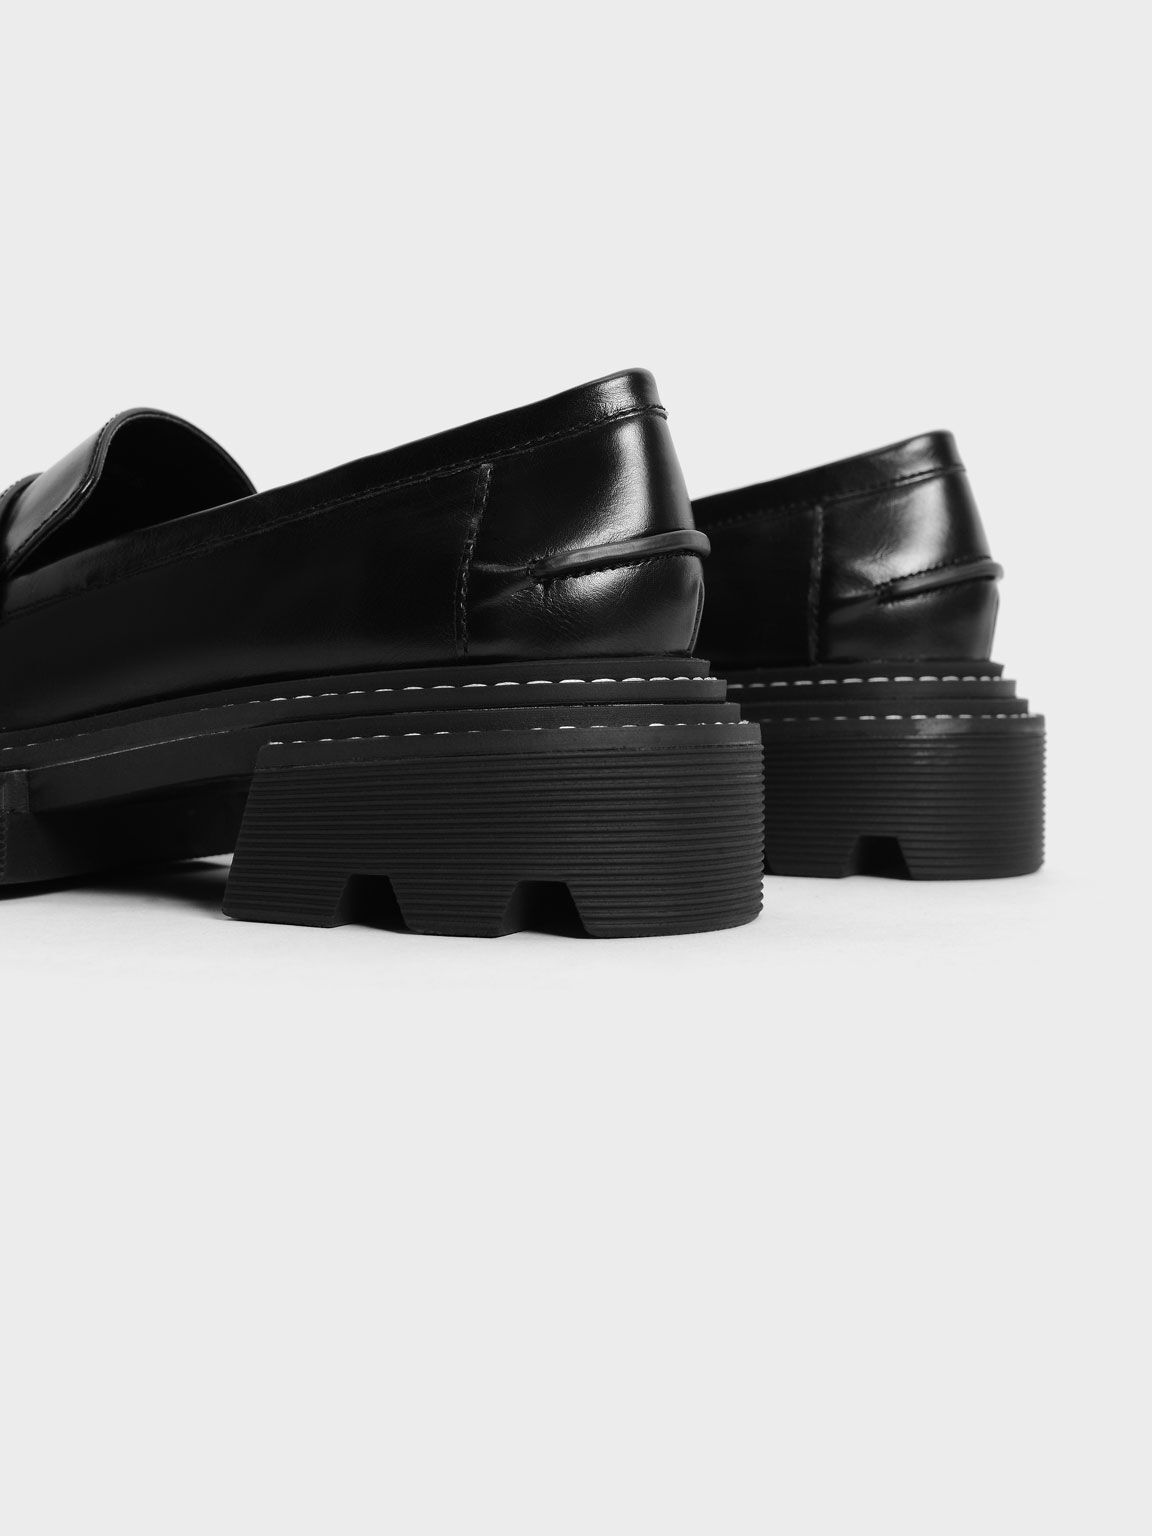 Charles & Keith - Women's Chunky Penny Loafers, Black, US 6